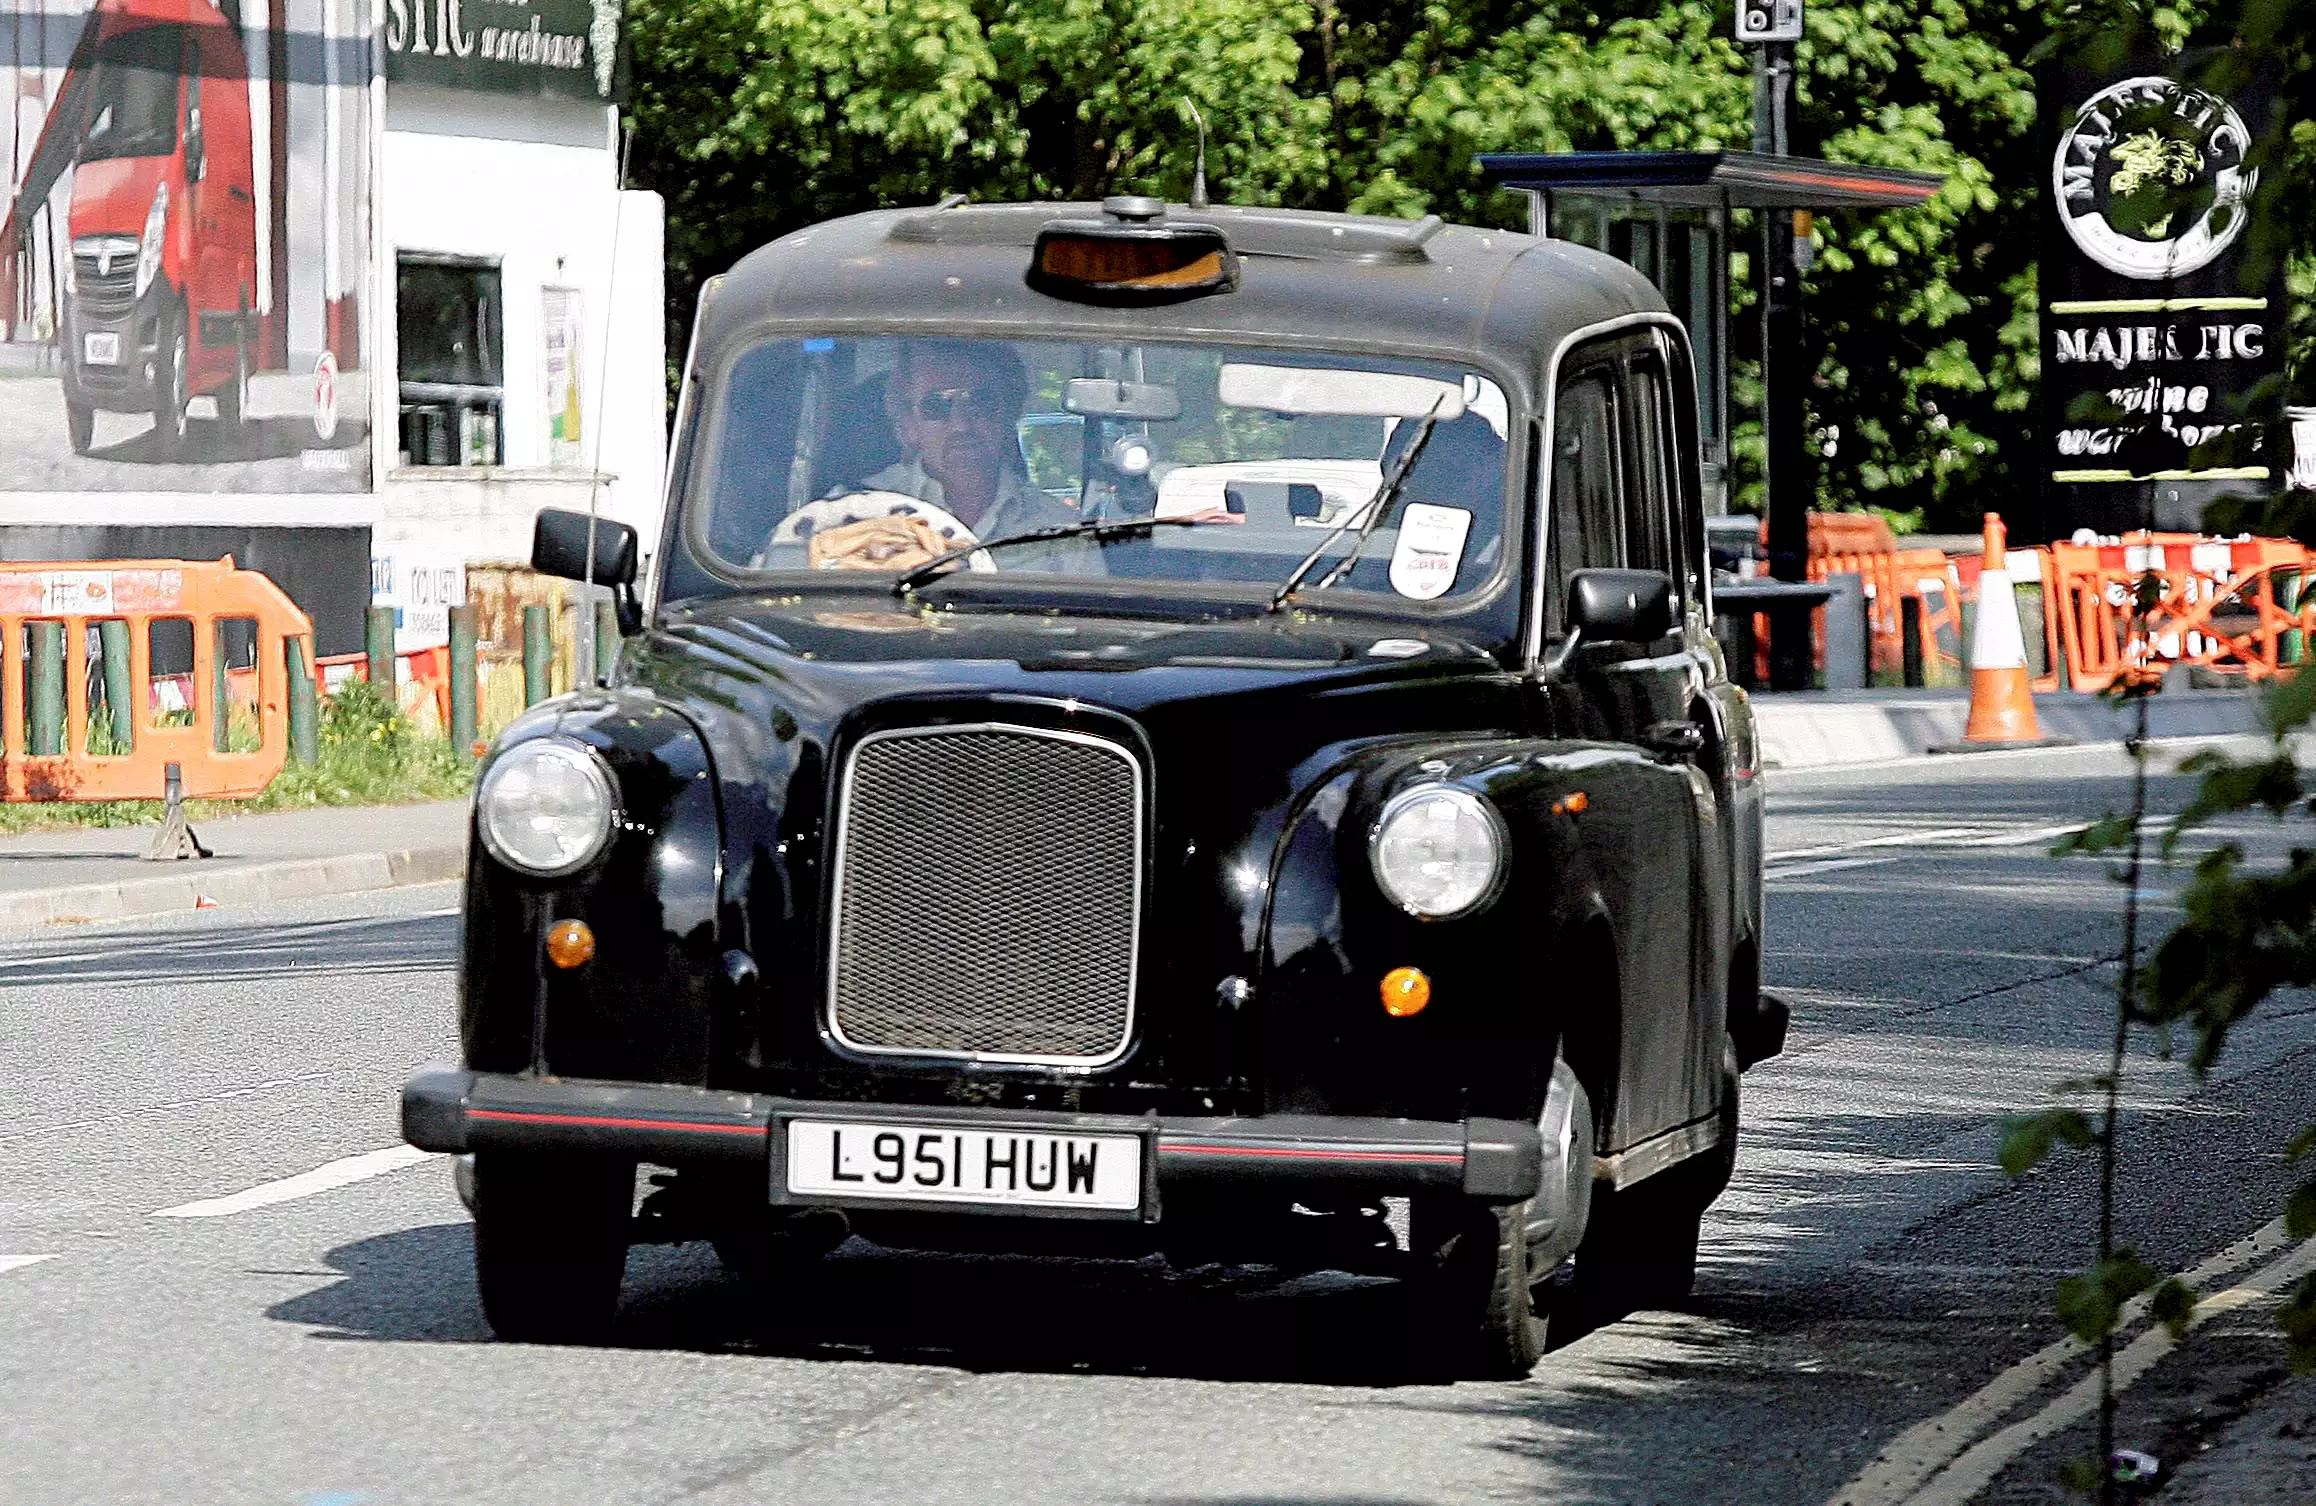 Noel used a black cab to try and avoid the traffic in Bristol. (